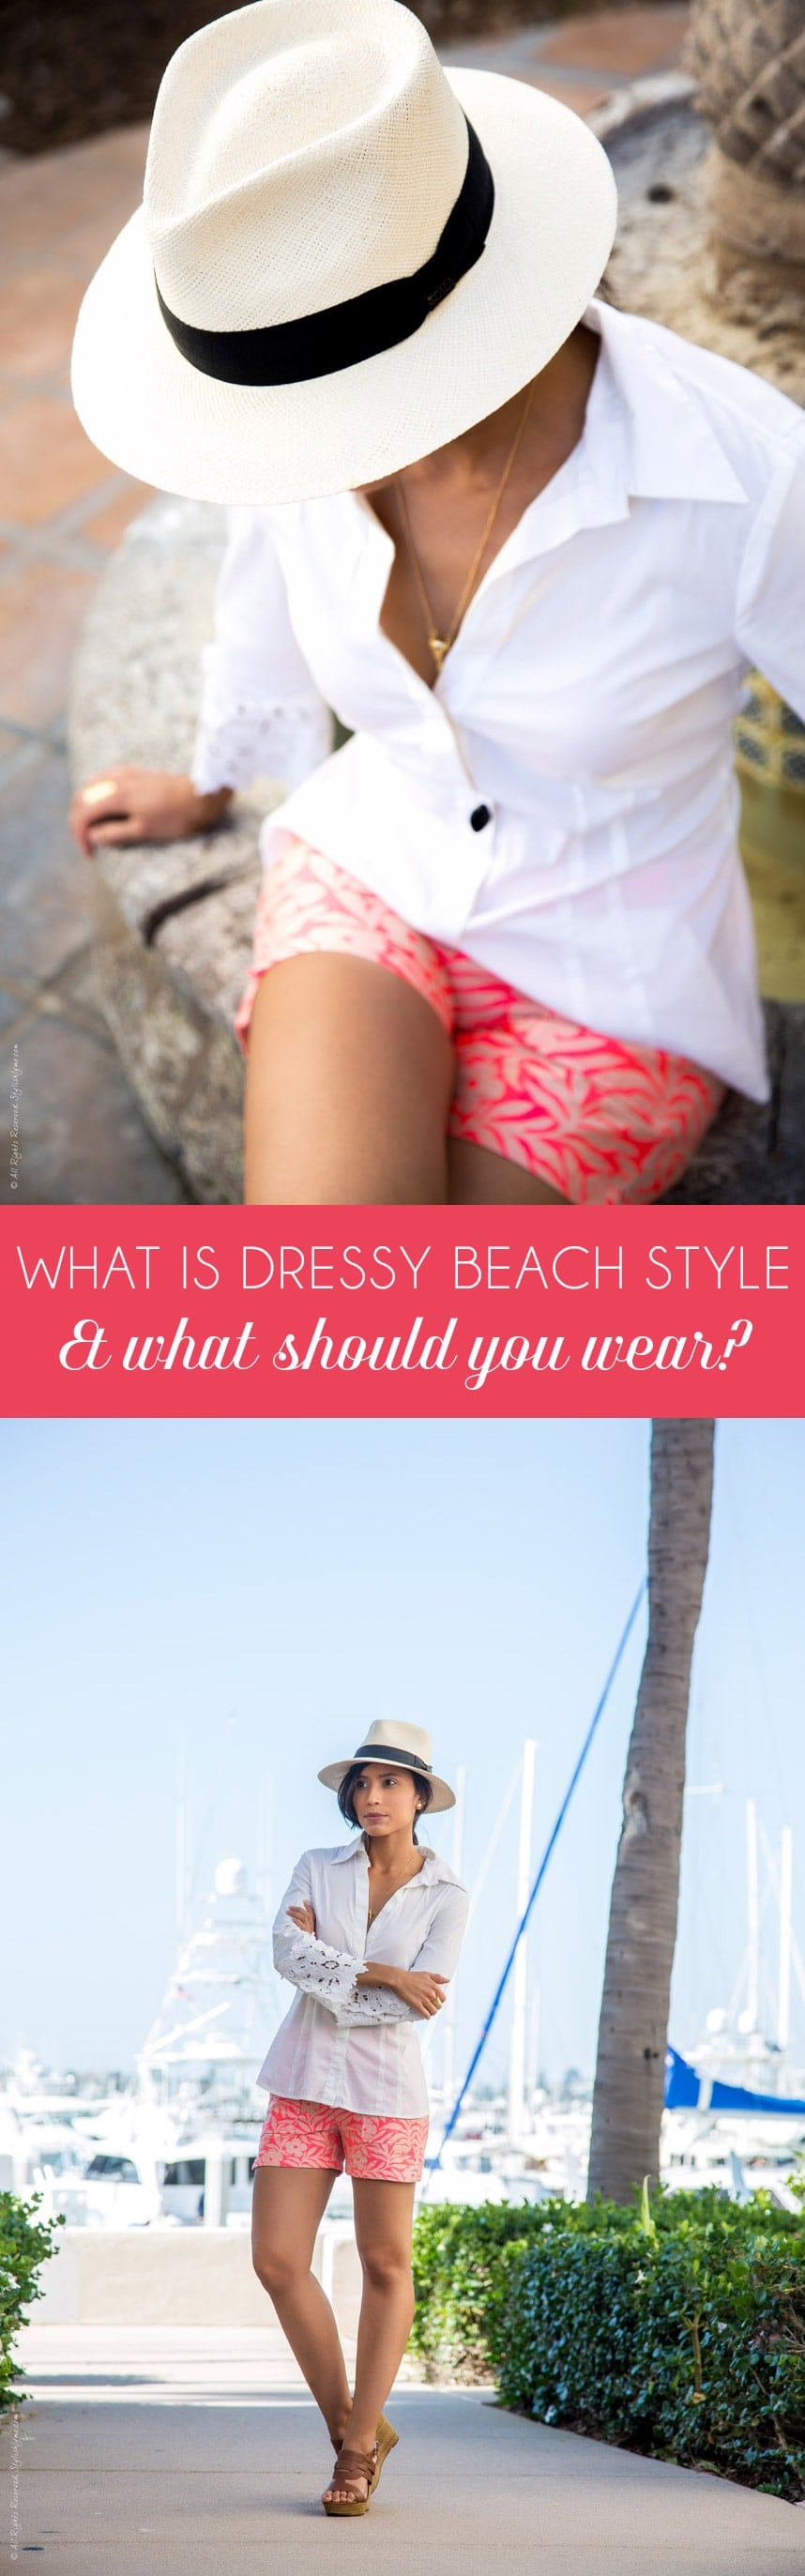 What is dressy beach style & what should you wear - Visit stylishlyme.com to read the three tips to nailing your dressy beach style